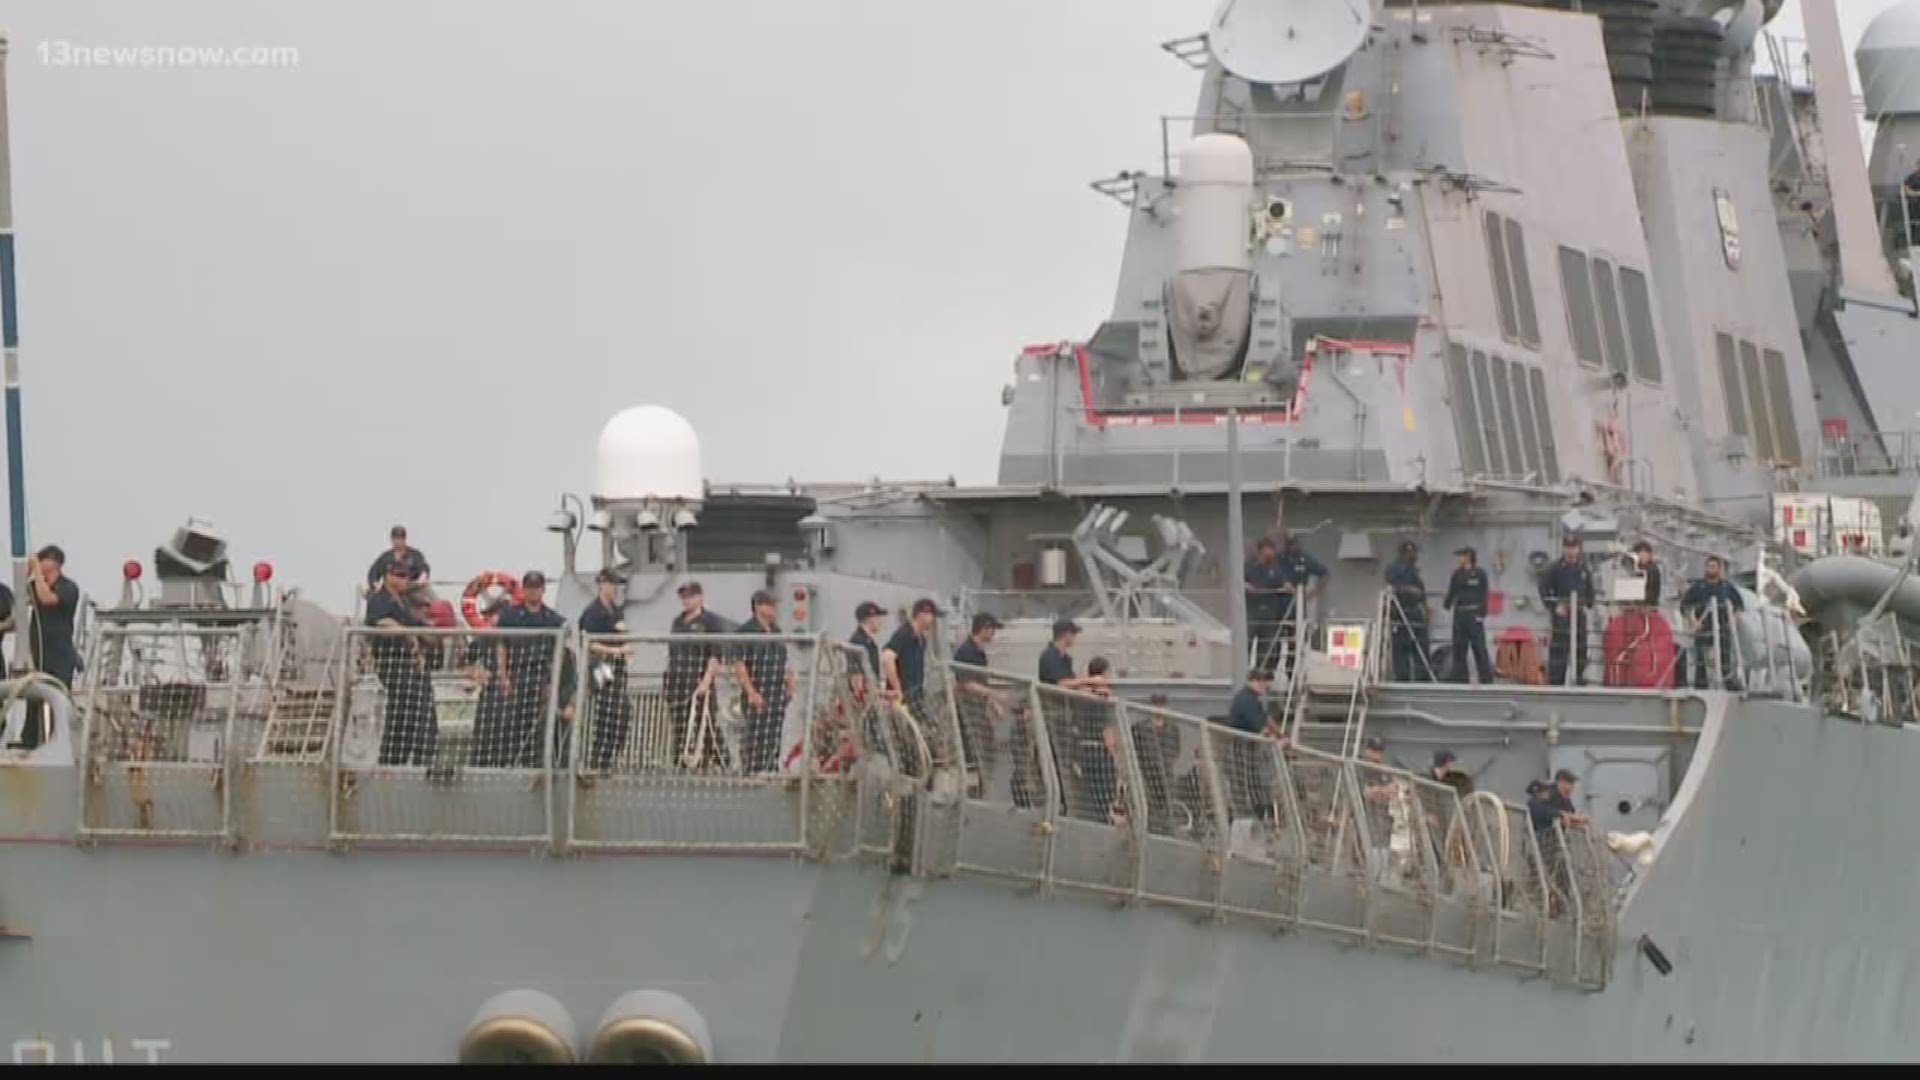 Navy ships were ordered to sortie to avoid damage in the port during Hurricane Florence, but with the now Tropical storm clear, the ships are returning home.